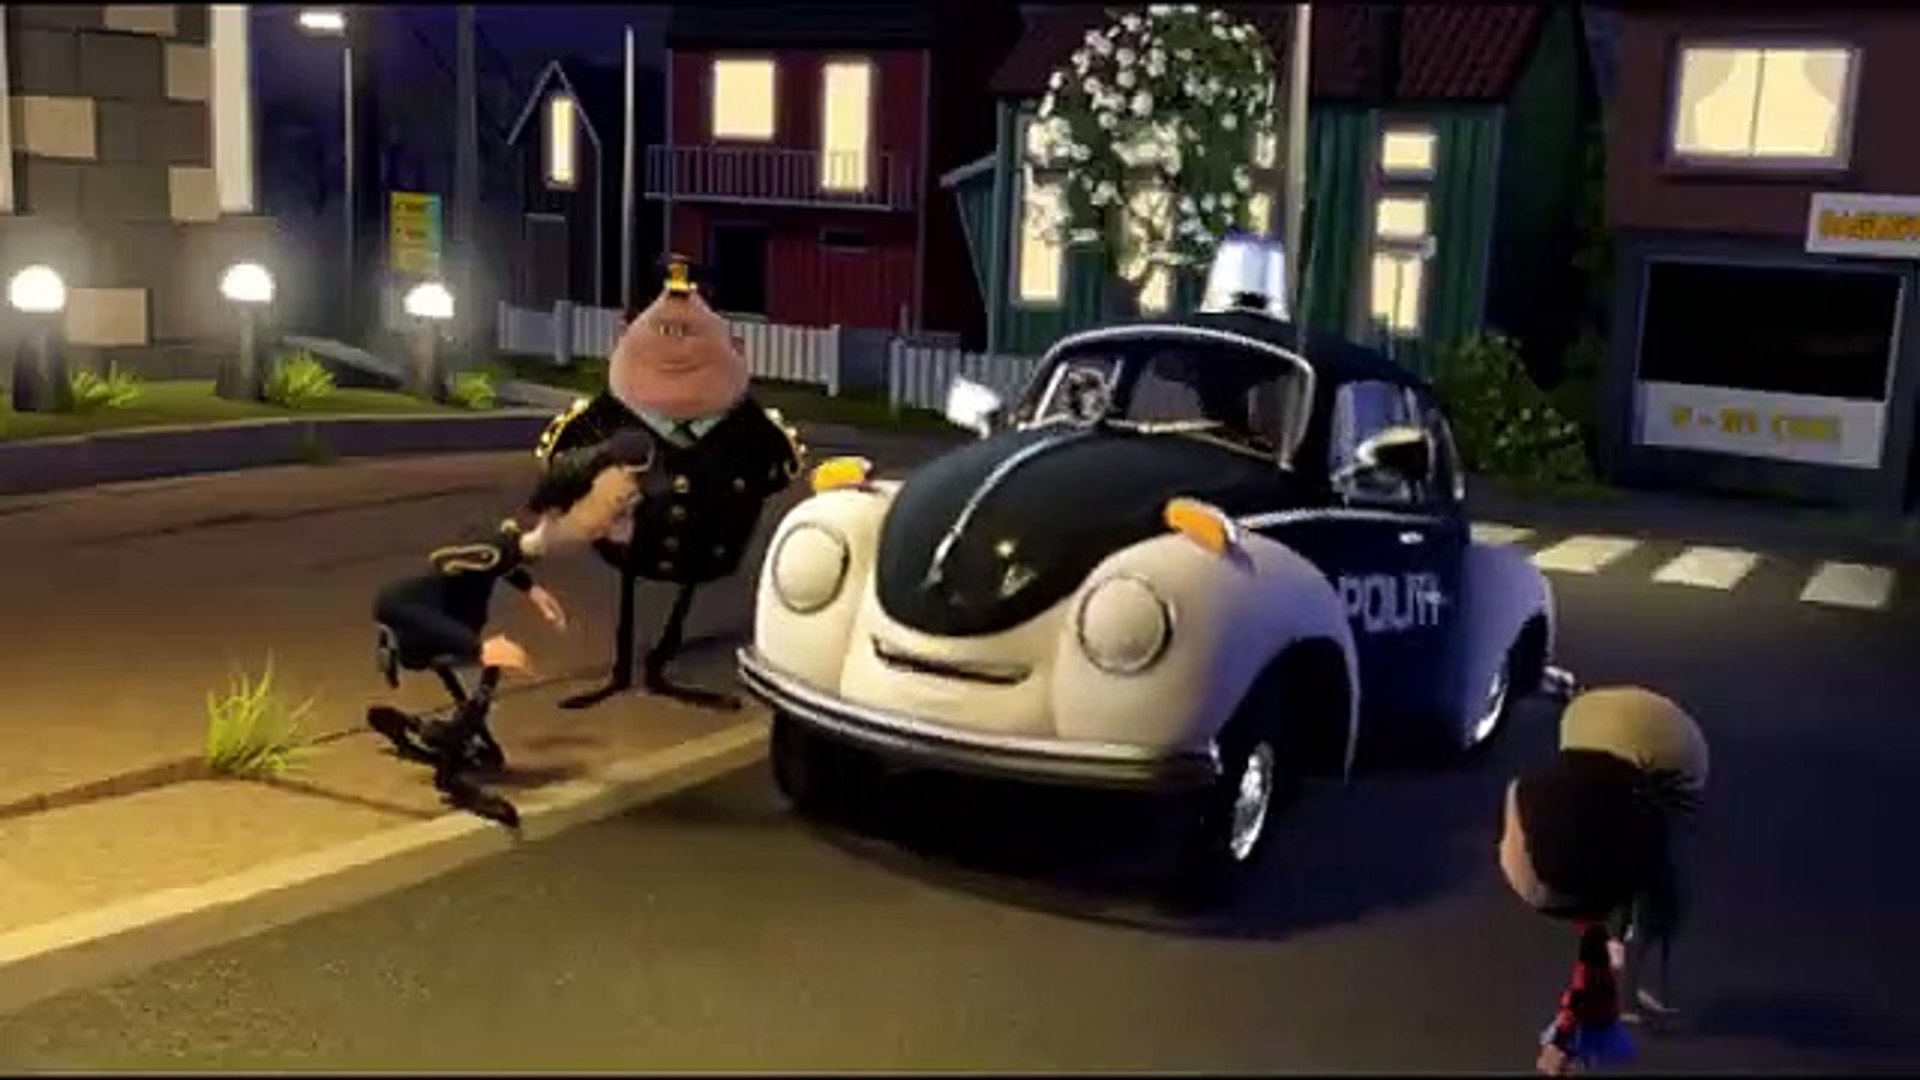 Ploddy the Police Car Makes a Splash | movie | 2010 | Official Trailer -  video Dailymotion